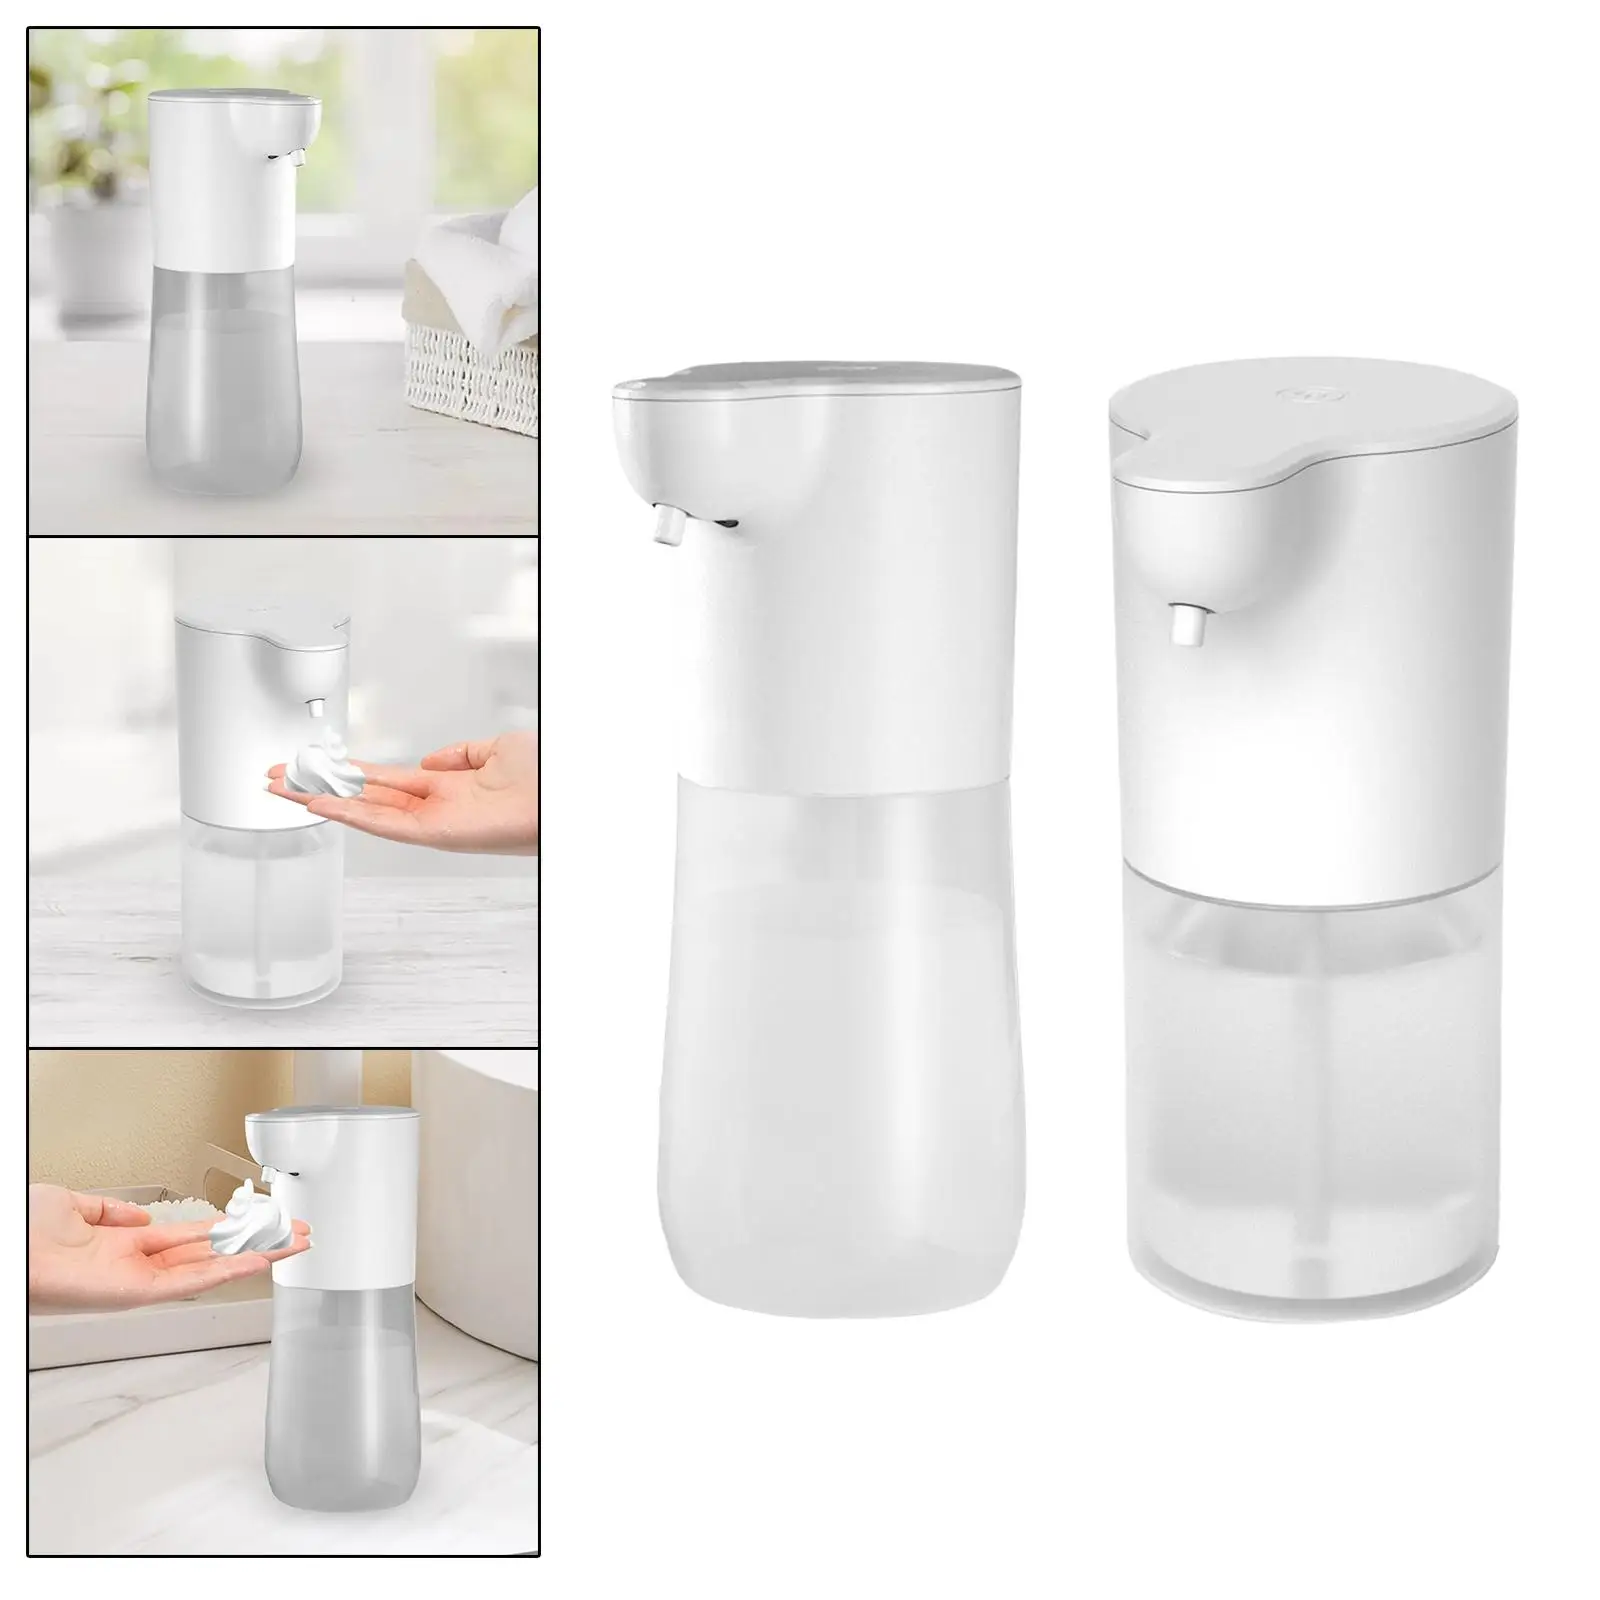 Four Gear Switch Automatic Soap Dispensers Hand Wash Waterproof Foaming Touchless Soap Dispensers for Washroom Countertop Kids